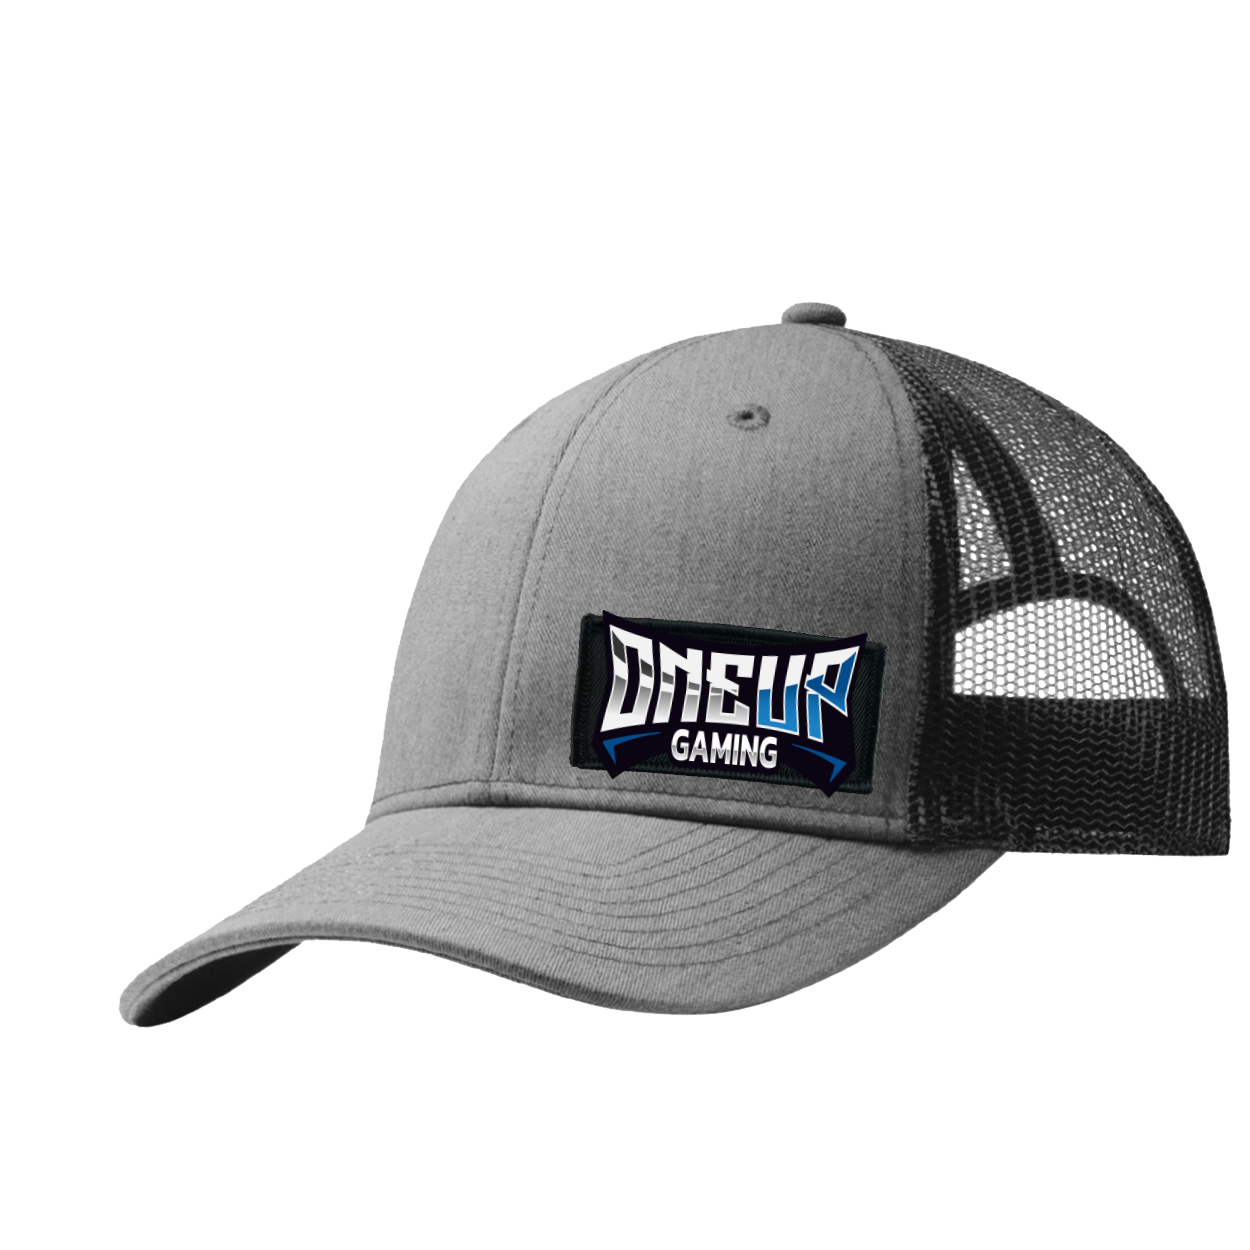 One Up Gaming Night Out Woven Patch Snapback Trucker Hat Heather Gray/Black 